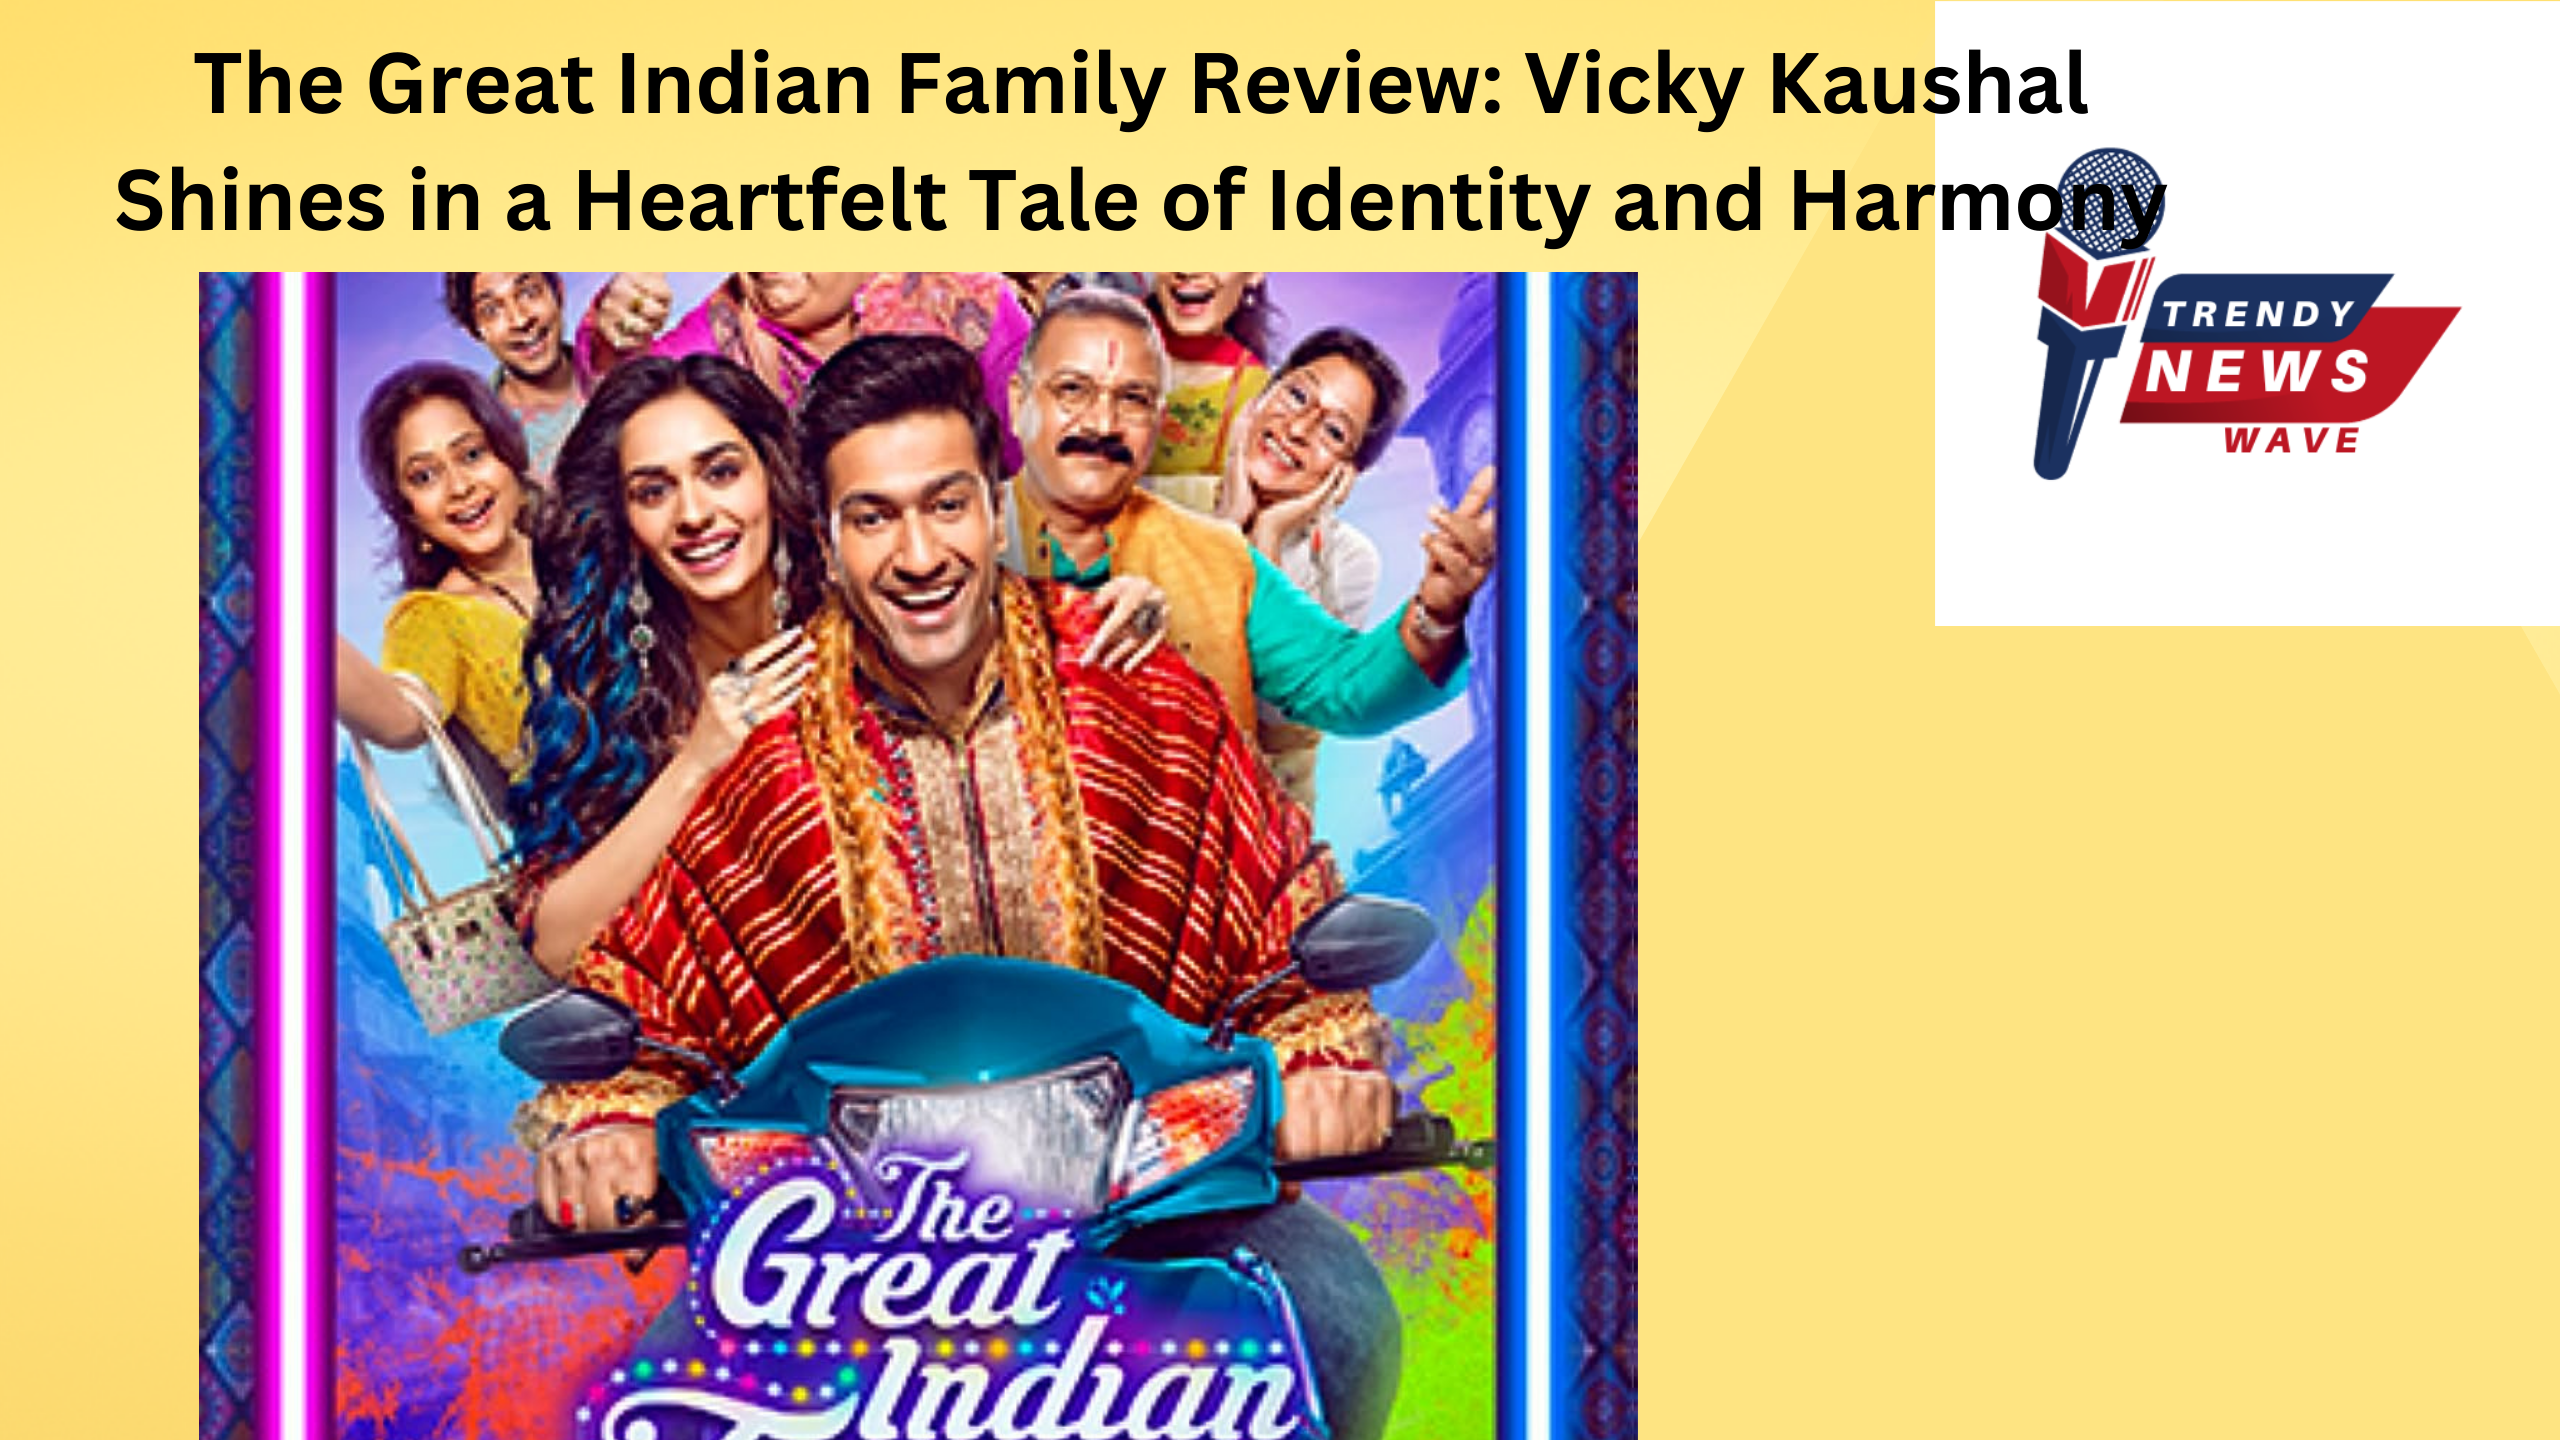 The Great Indian Family" Review